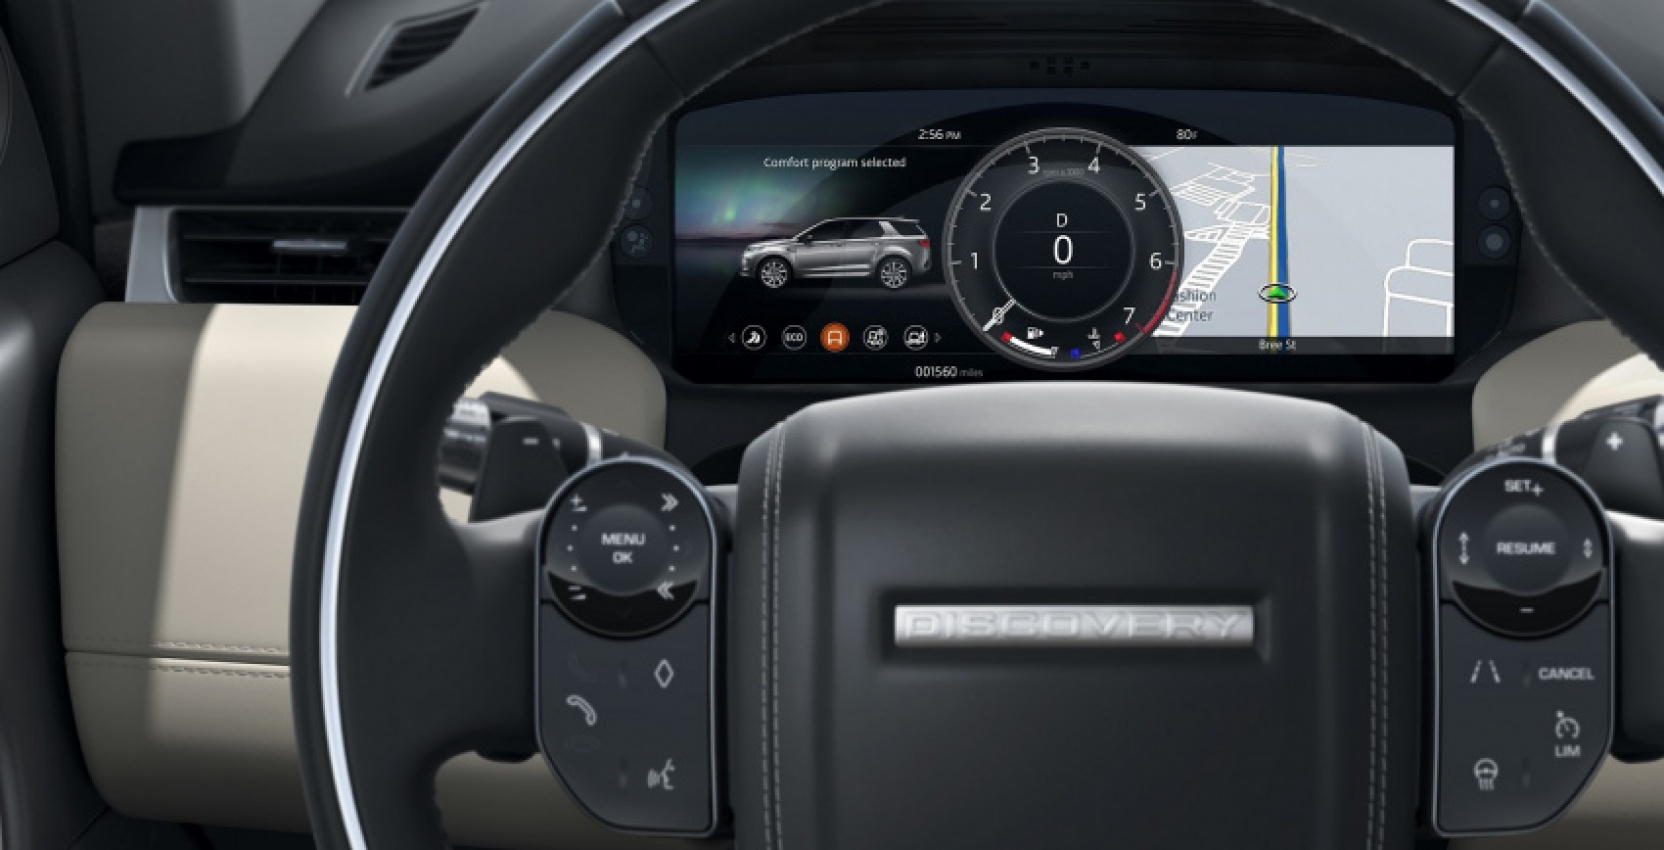 autos, car brands, cars, jaguar, land rover, android, automotive, cars, jaguar land rover, jaguar land rover malaysia, malaysia, android, jaguar land rover malaysia introduces new discovery sport r-dynamic in choice of 5-seater and 5+2-seater